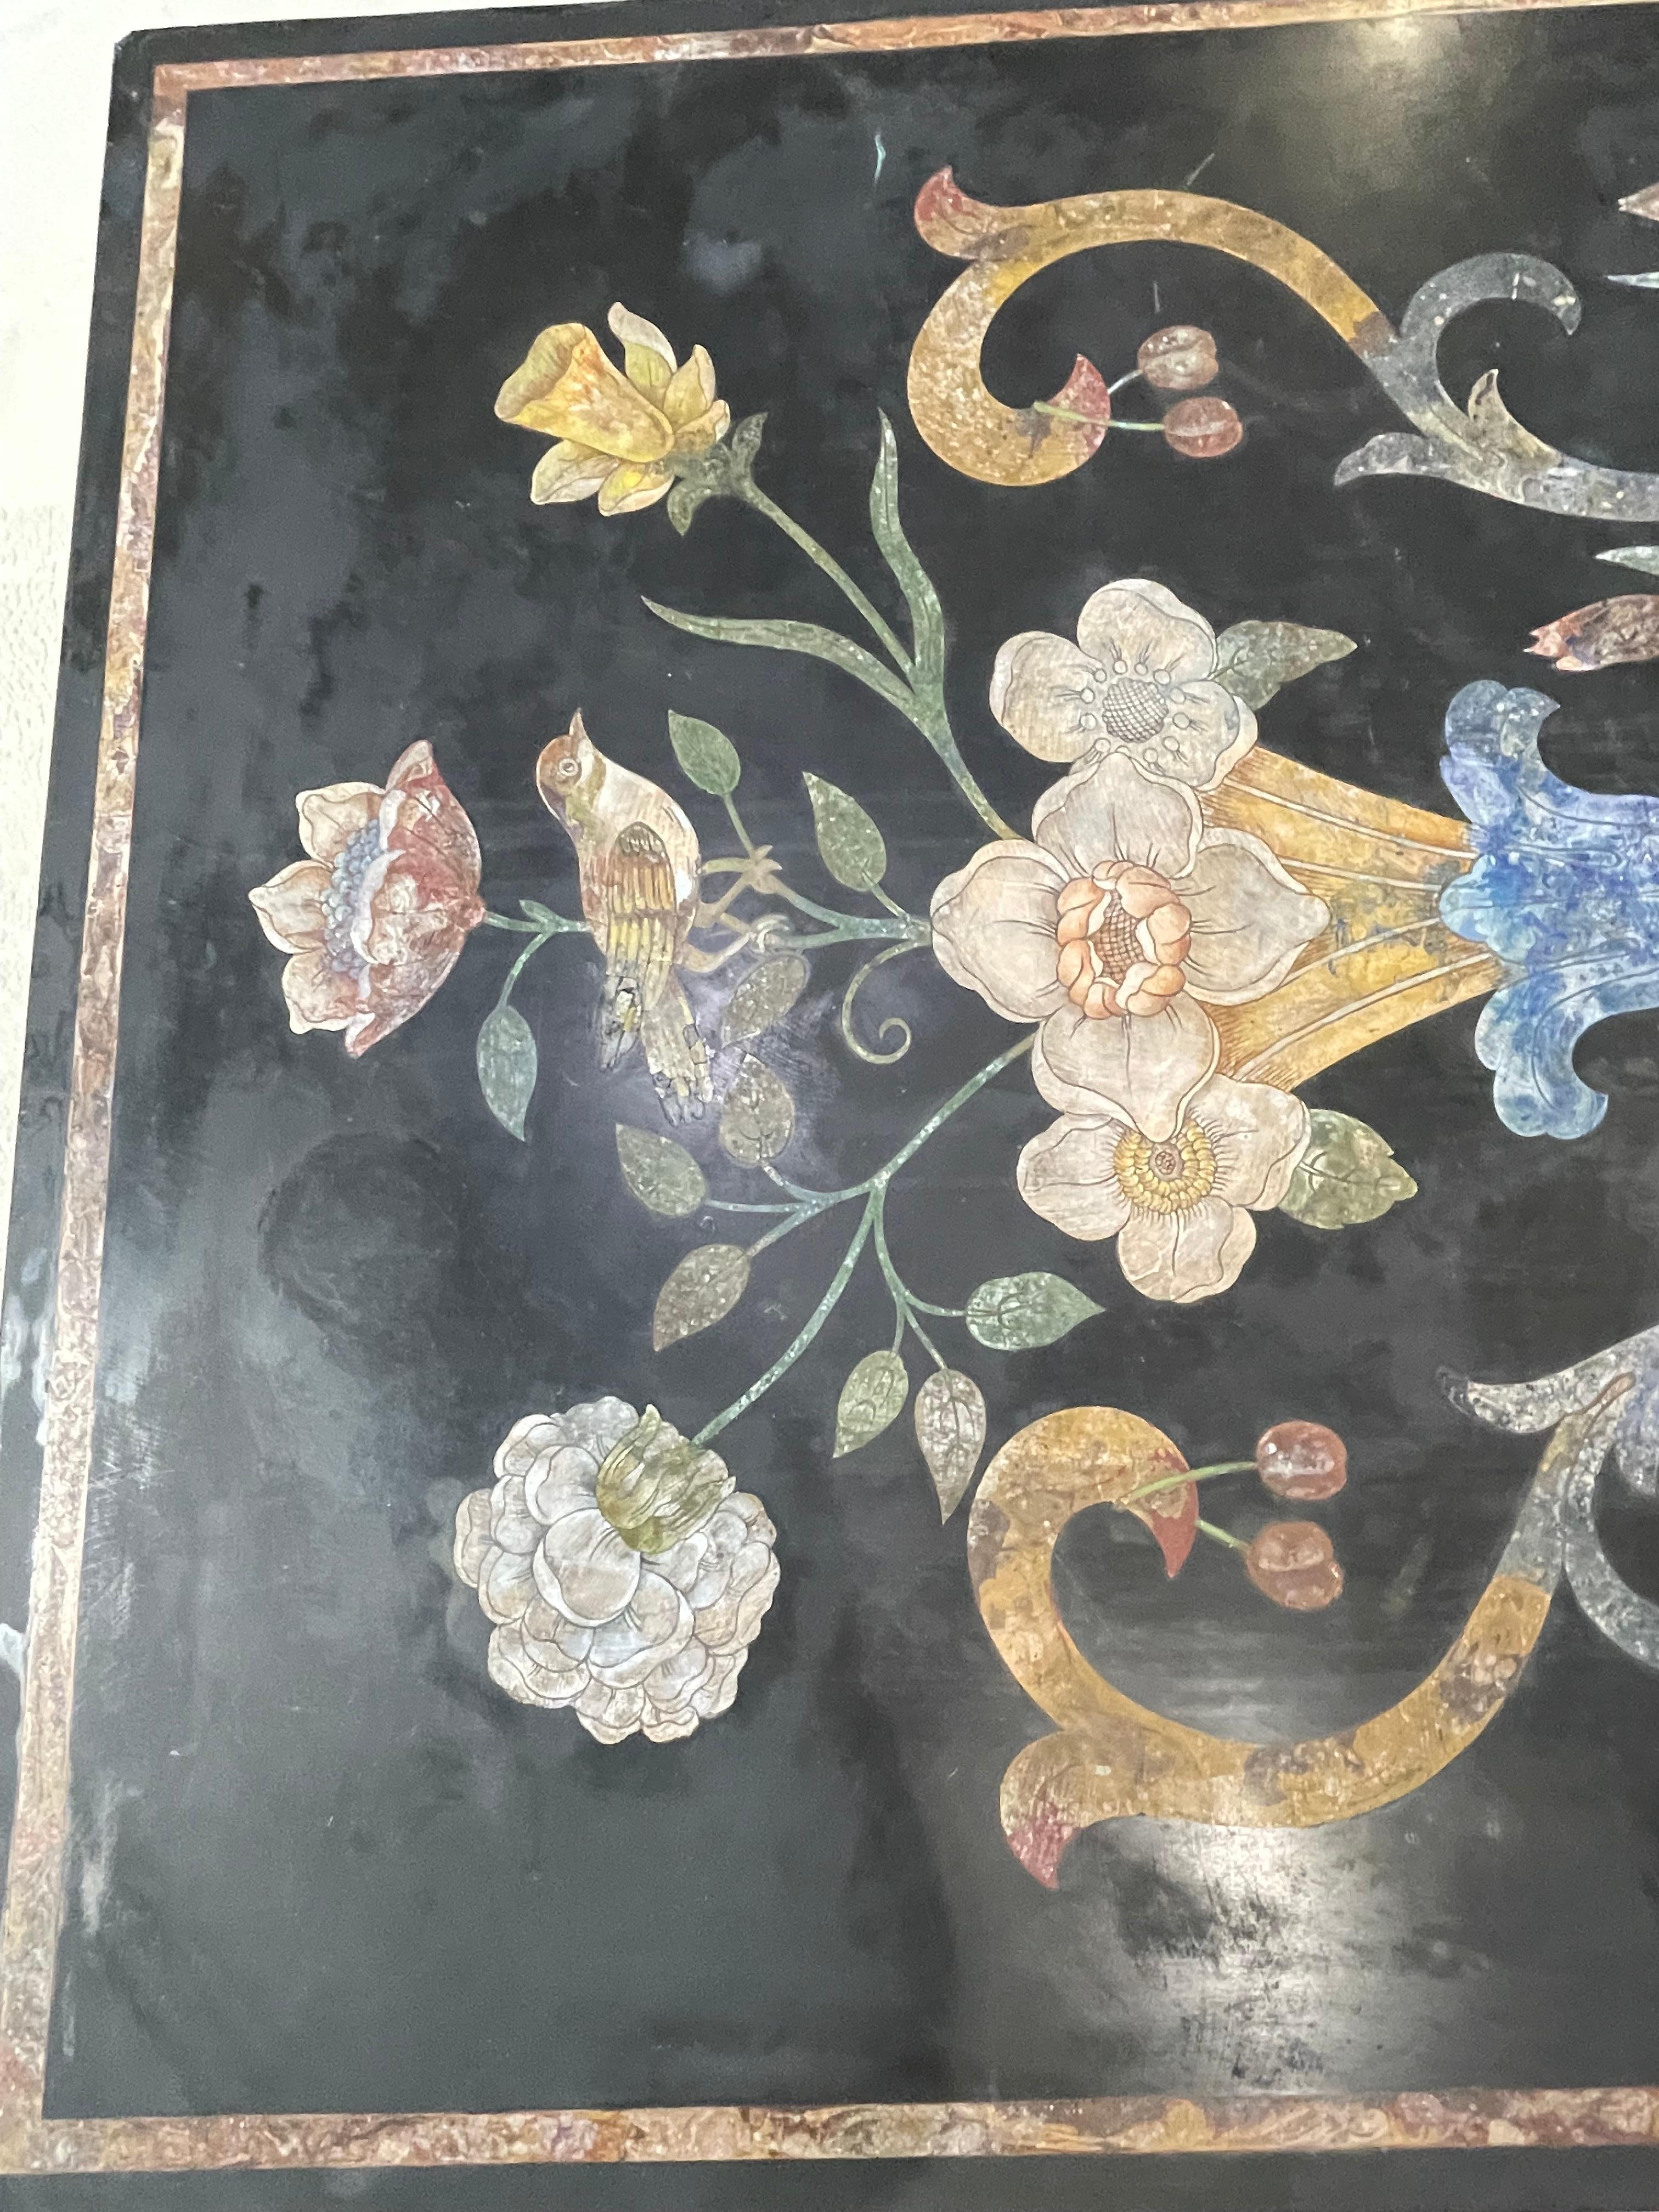 Italian polychrome scagiola table representing flowers, foliage, cherries, birds and brambles. The colors are a degradation of ocher yellow, a few notes of blue and pink enhance the picture. This scagiola table totally represents the italian spirit